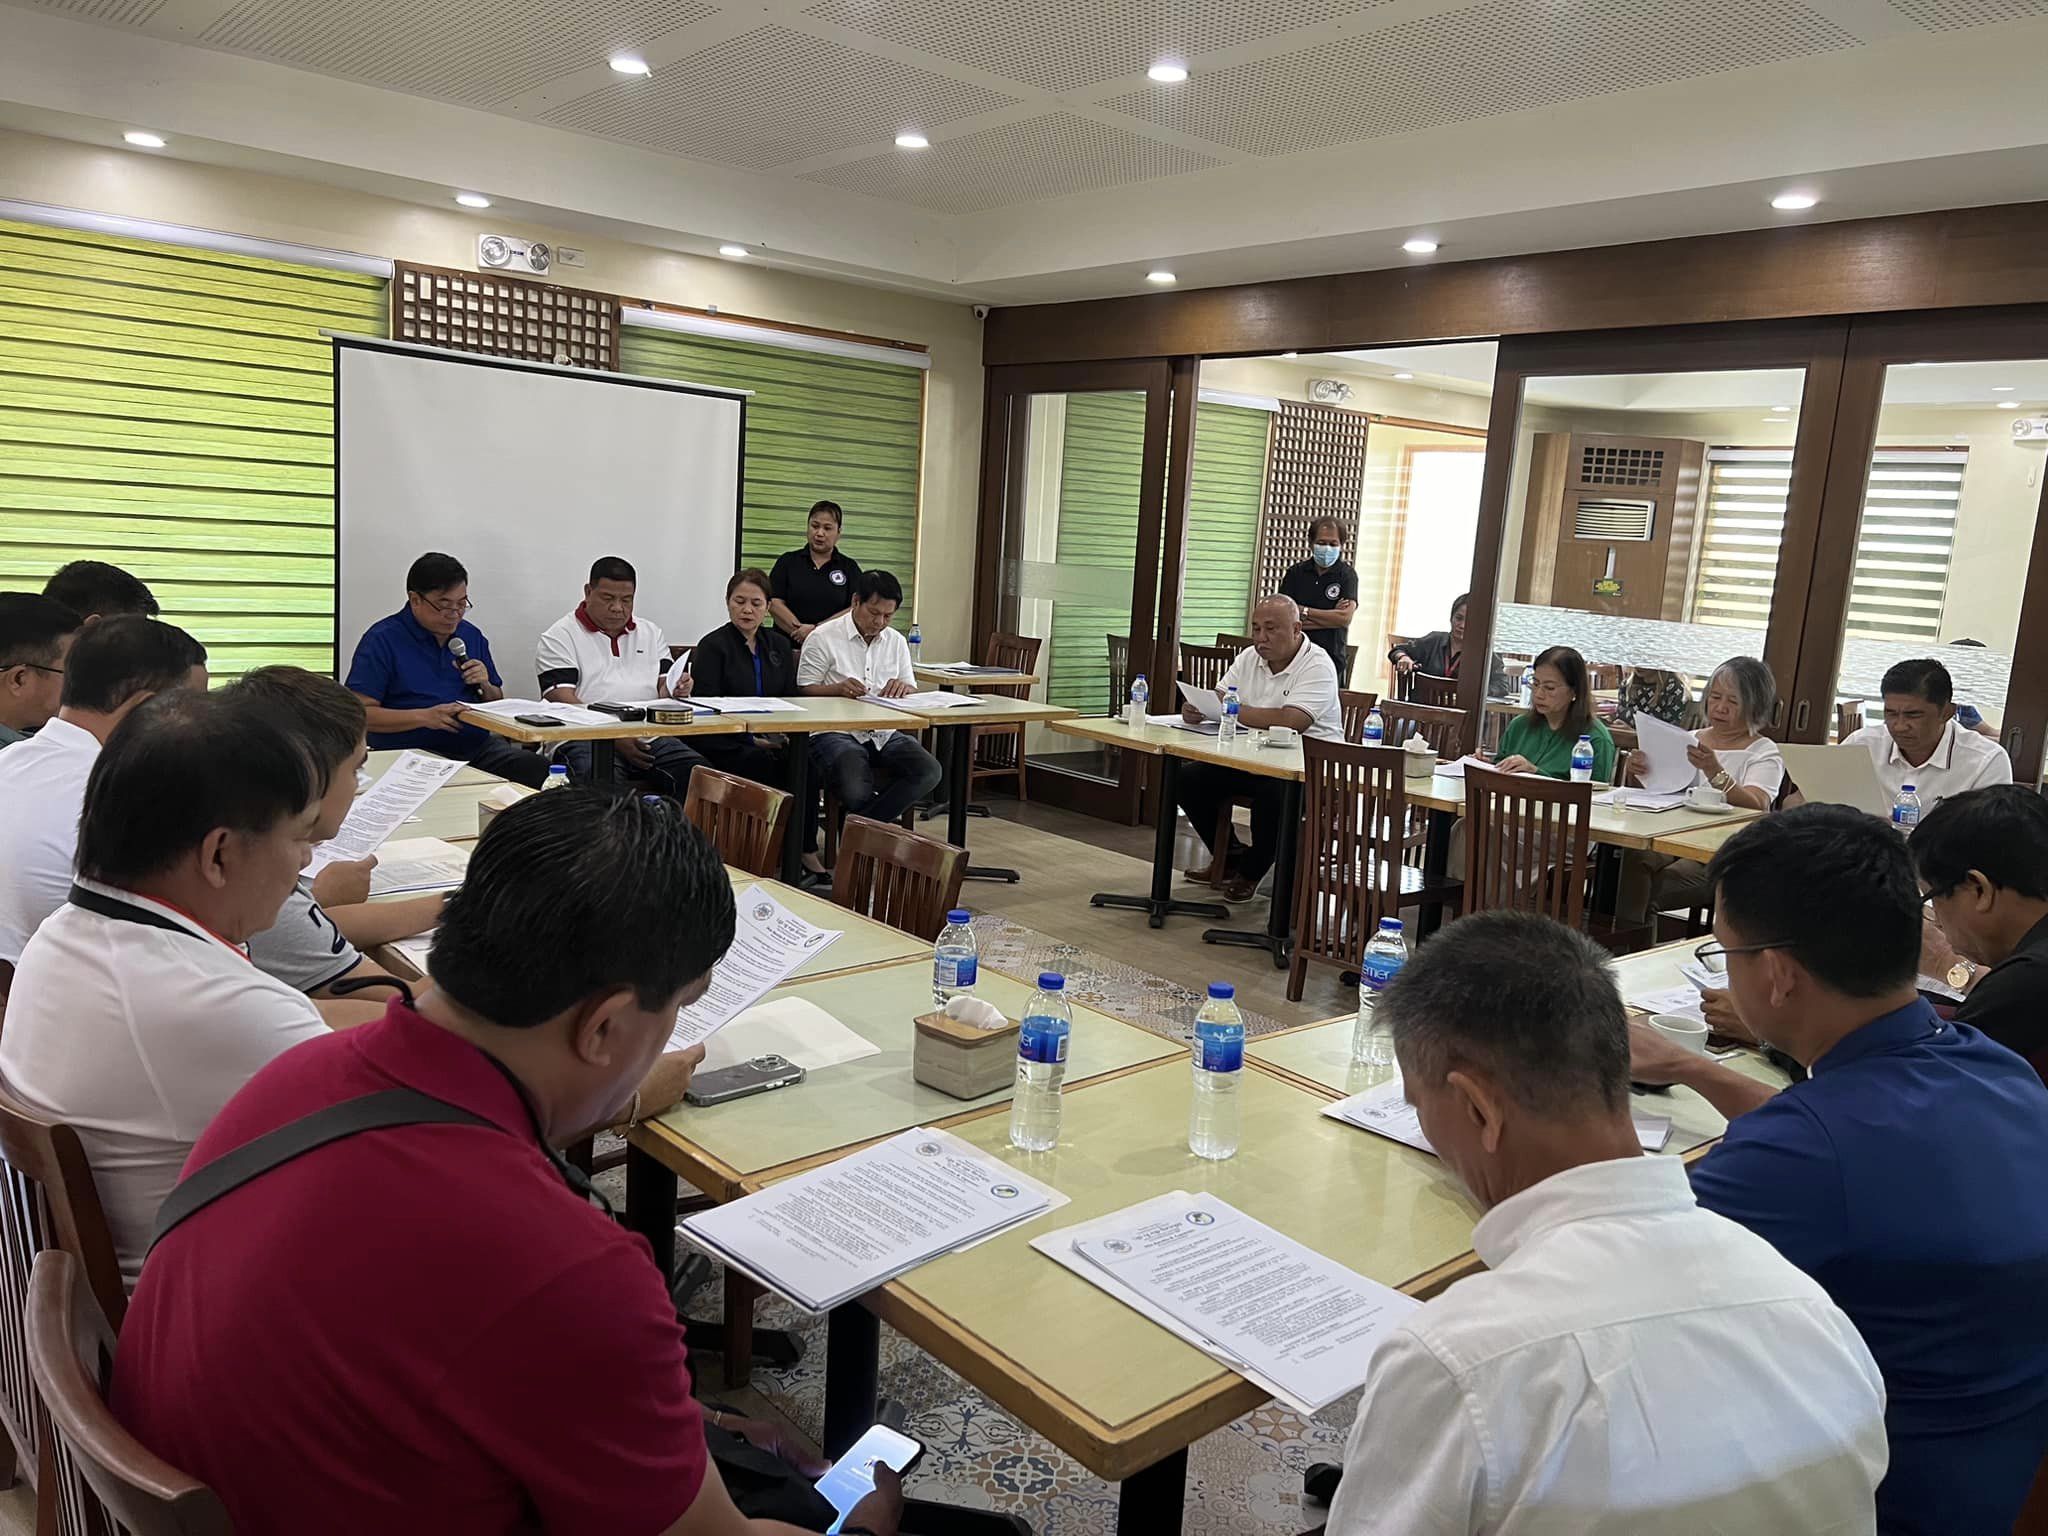 LnB Bulacan Chapter holds first meeting of the year